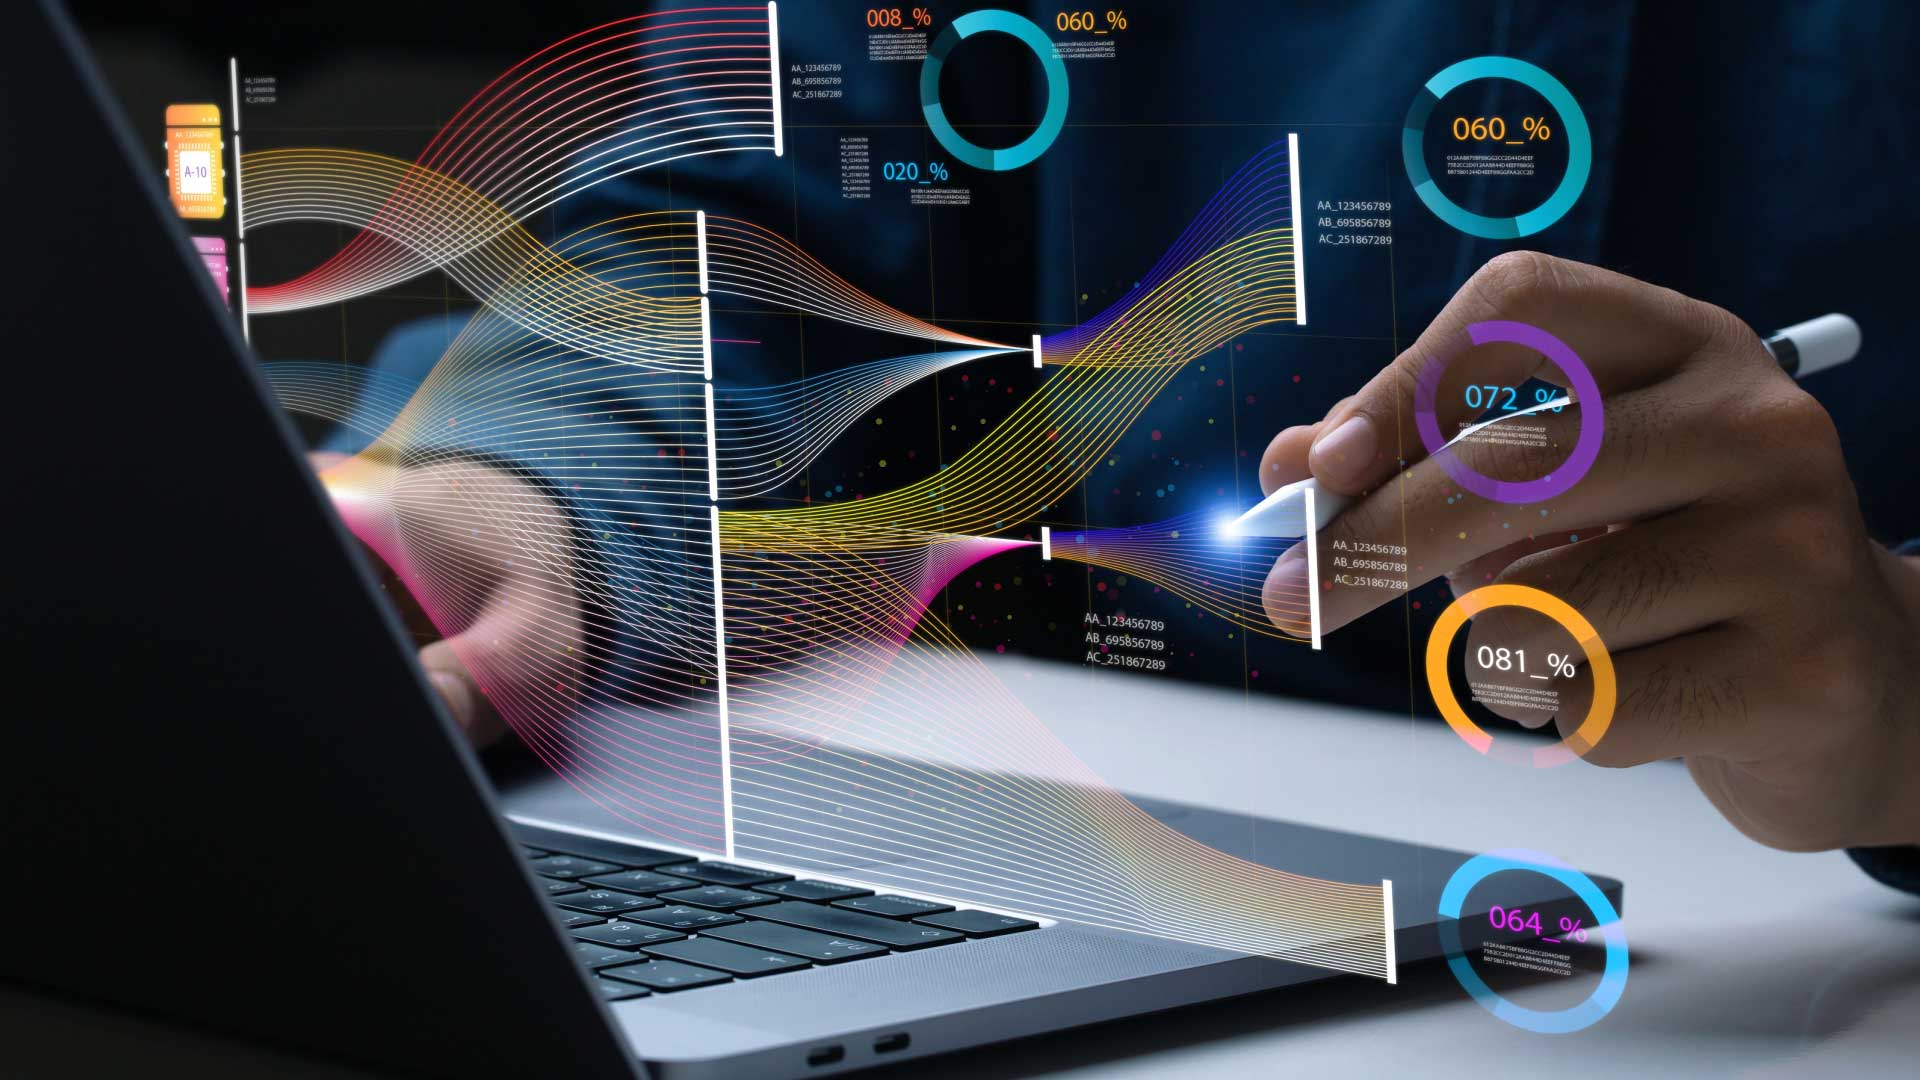 Abstract image of a person using a laptop with various graphs floating around.